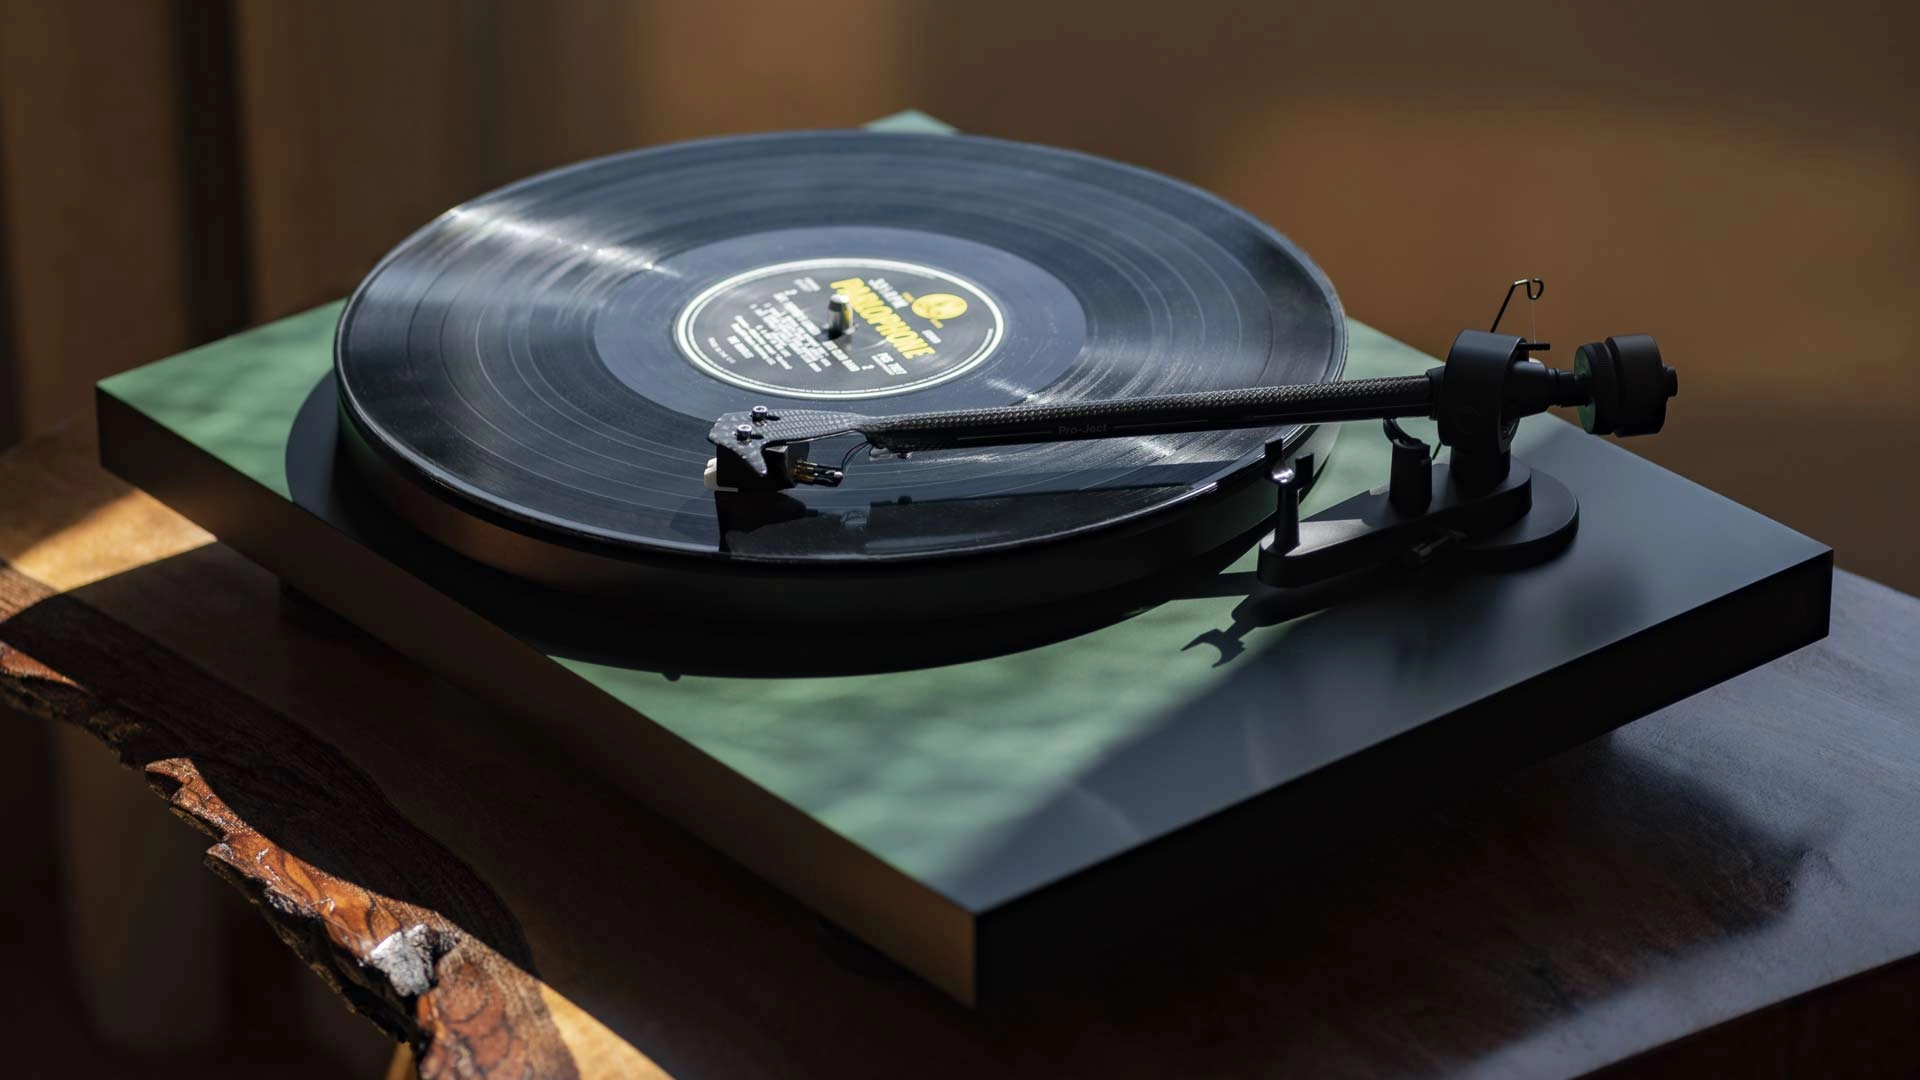 Pro-Ject Turntables - Pro-Ject Audio USA